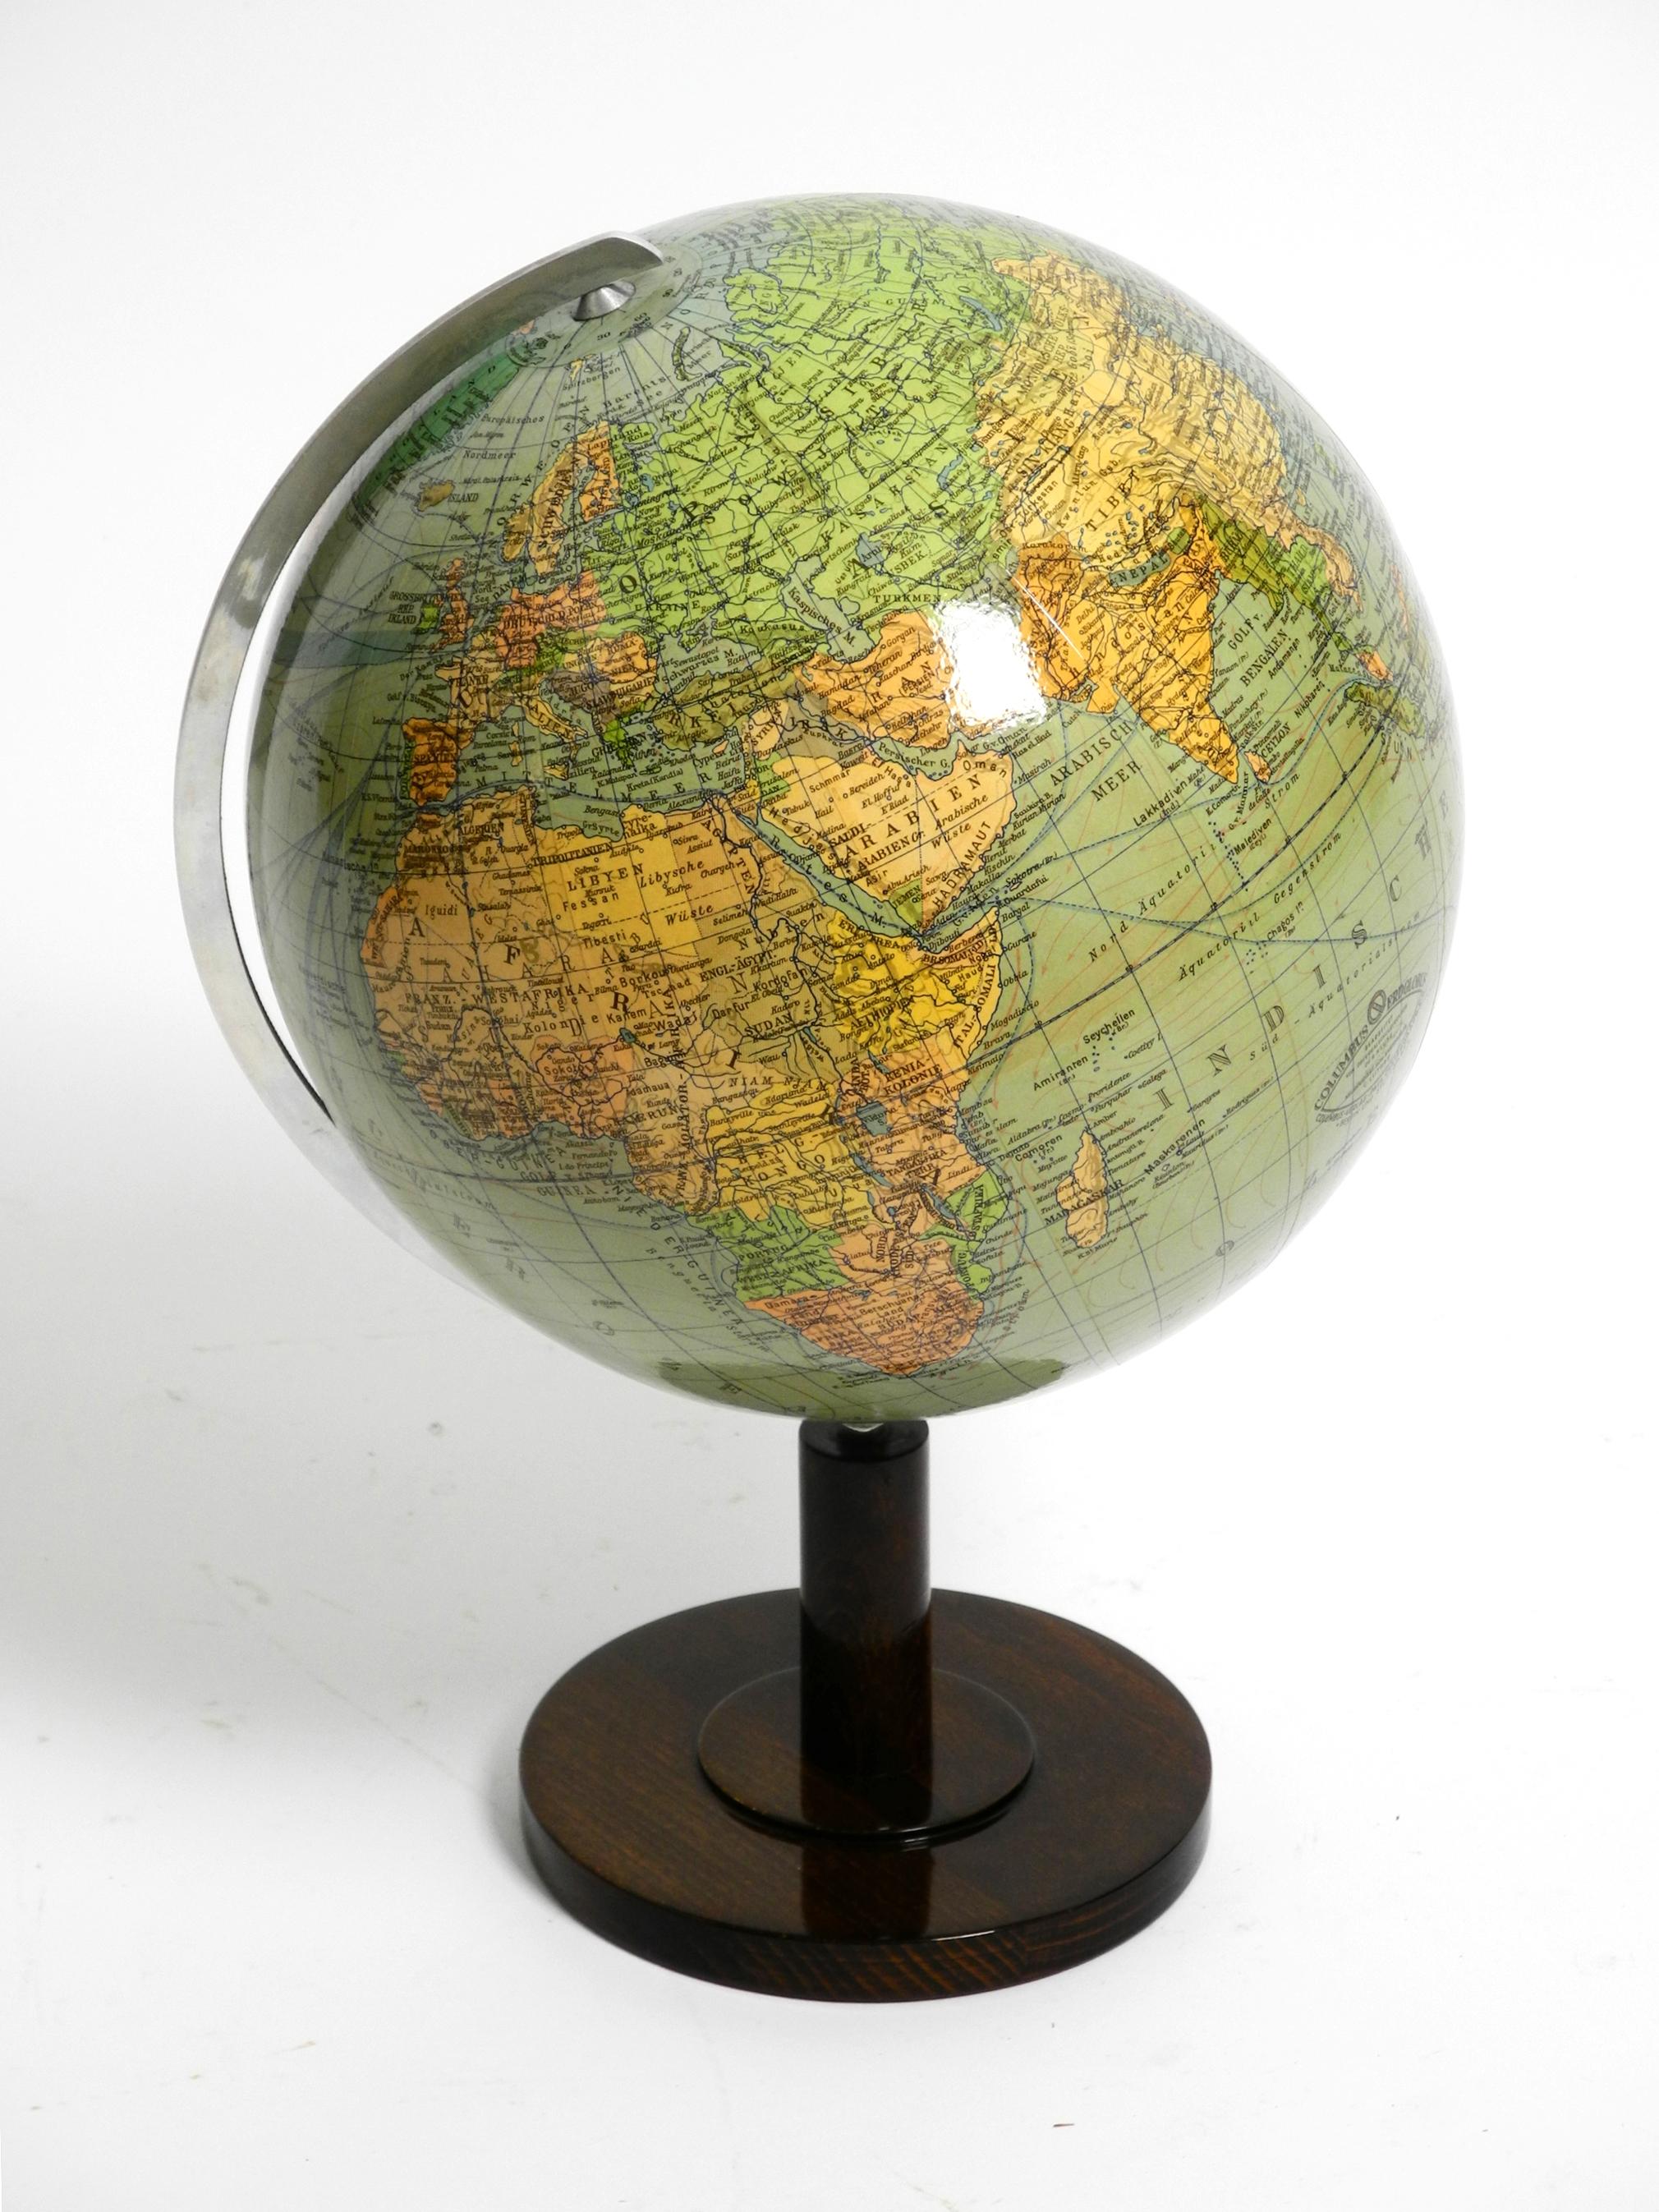 Beautiful 1950s Columbus terrestrial globe. Scale 1:48,000,000.
Produced by Columbus Verlag Paul Oestergaard K.G. Berlin and Stuttgart.
Base made of shiny walnut wood. The globe is made of bakelite. The axle is metal.
The globe is in very good